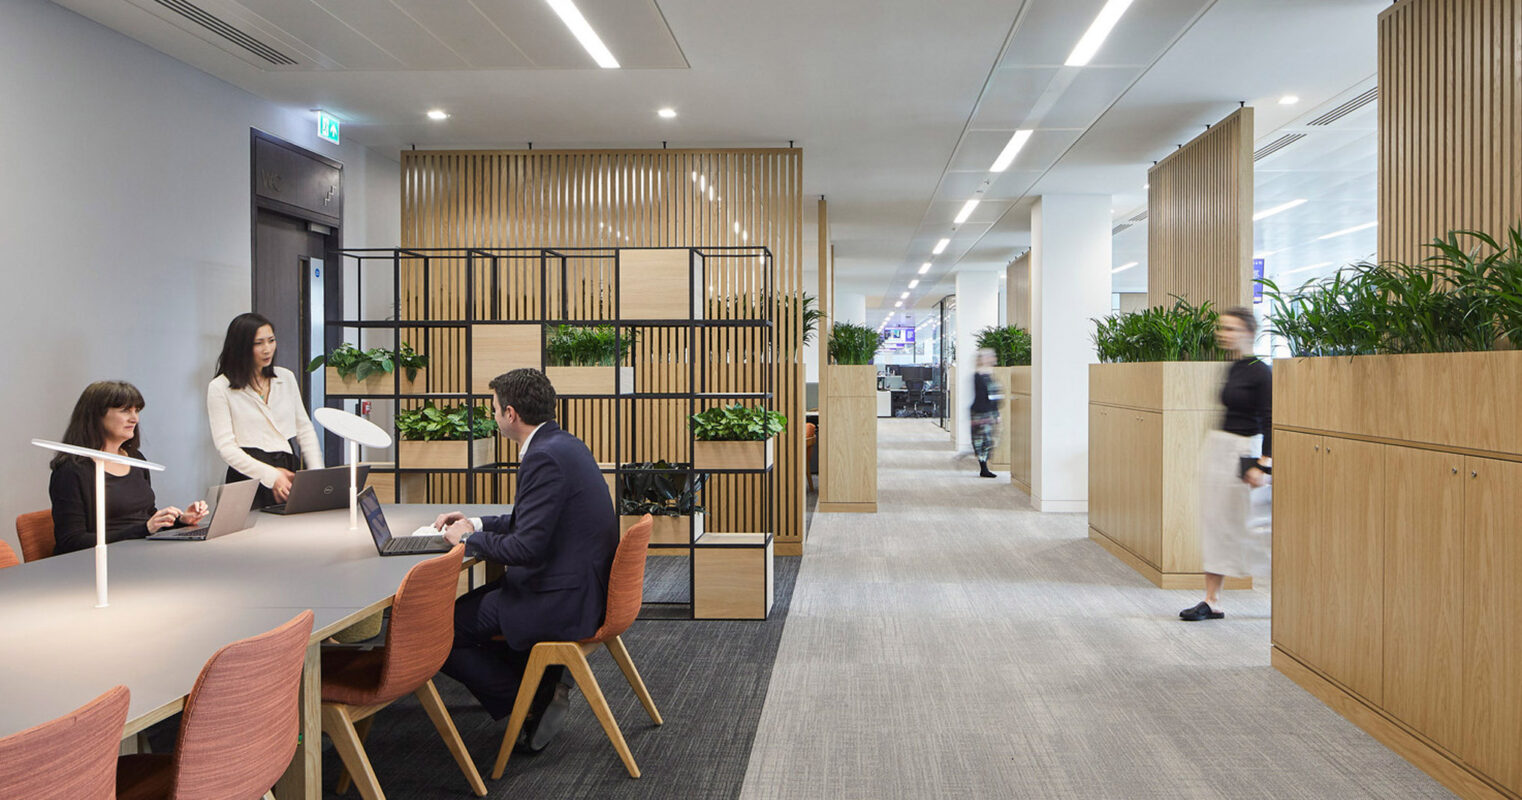 Modern office space featuring an open floor layout with sleek, white tables and coral chairs. Wooden slatted room dividers add texture, while employees engage in collaborative work under warm, ambient lighting.